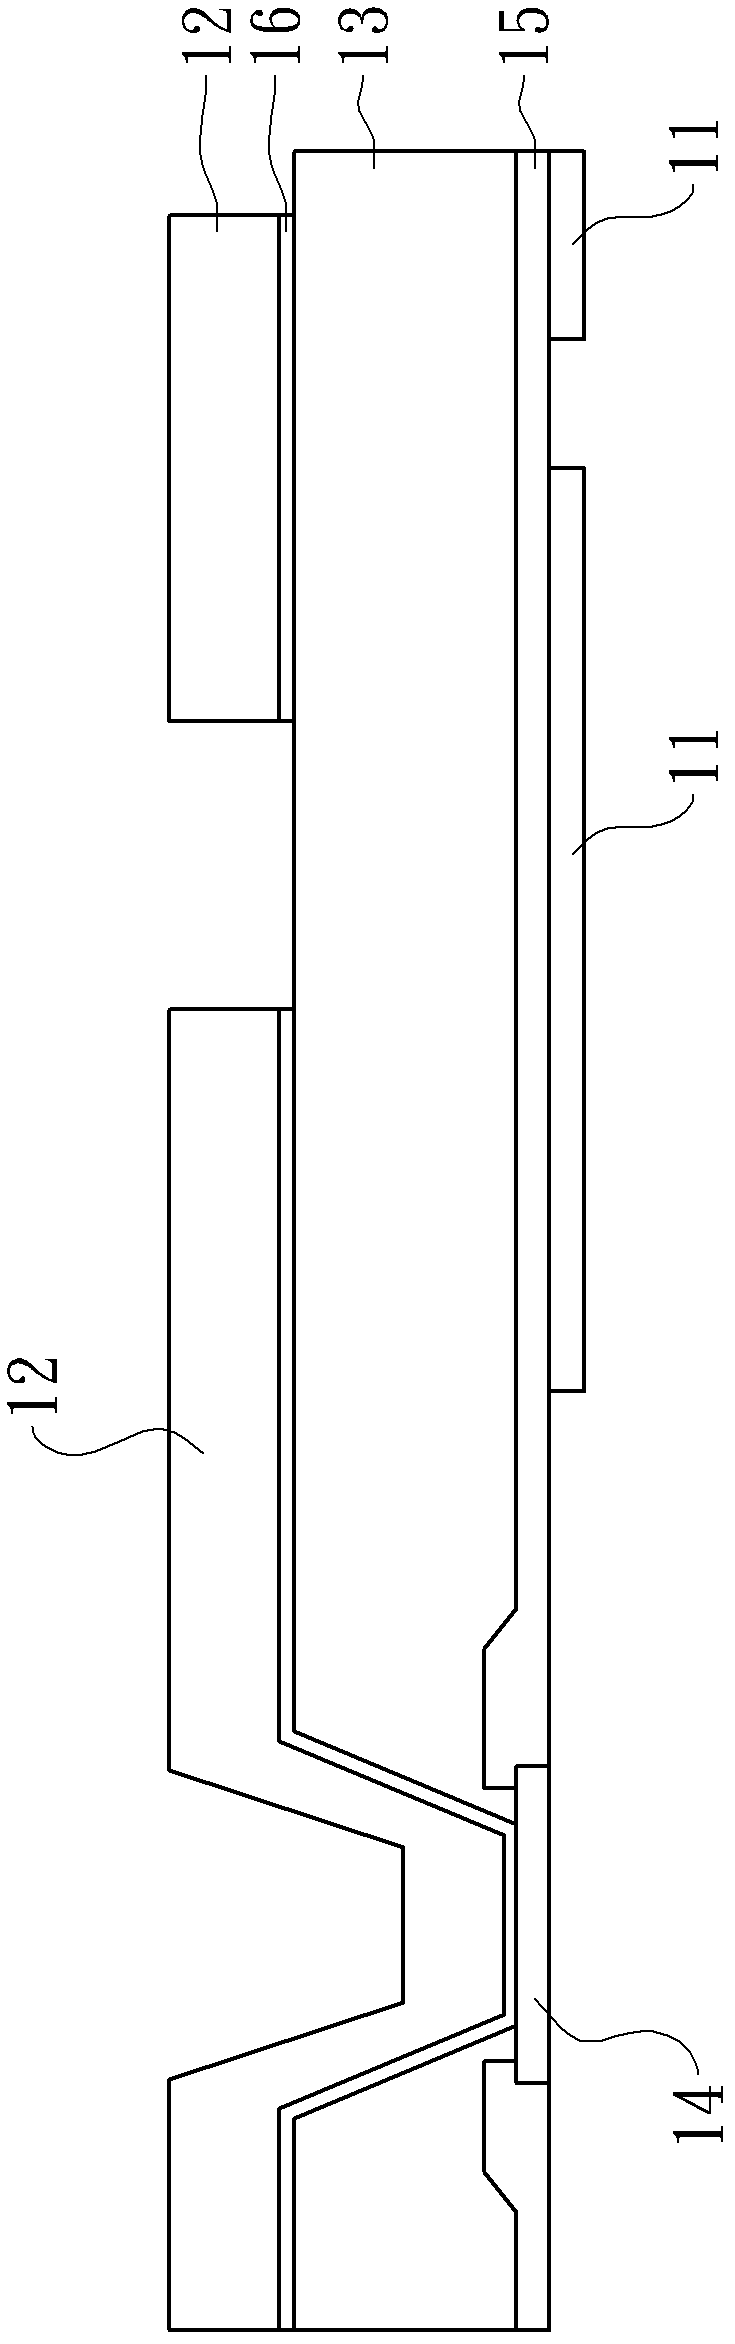 Composite semi-conductor integrated circuit with three-dimensional element